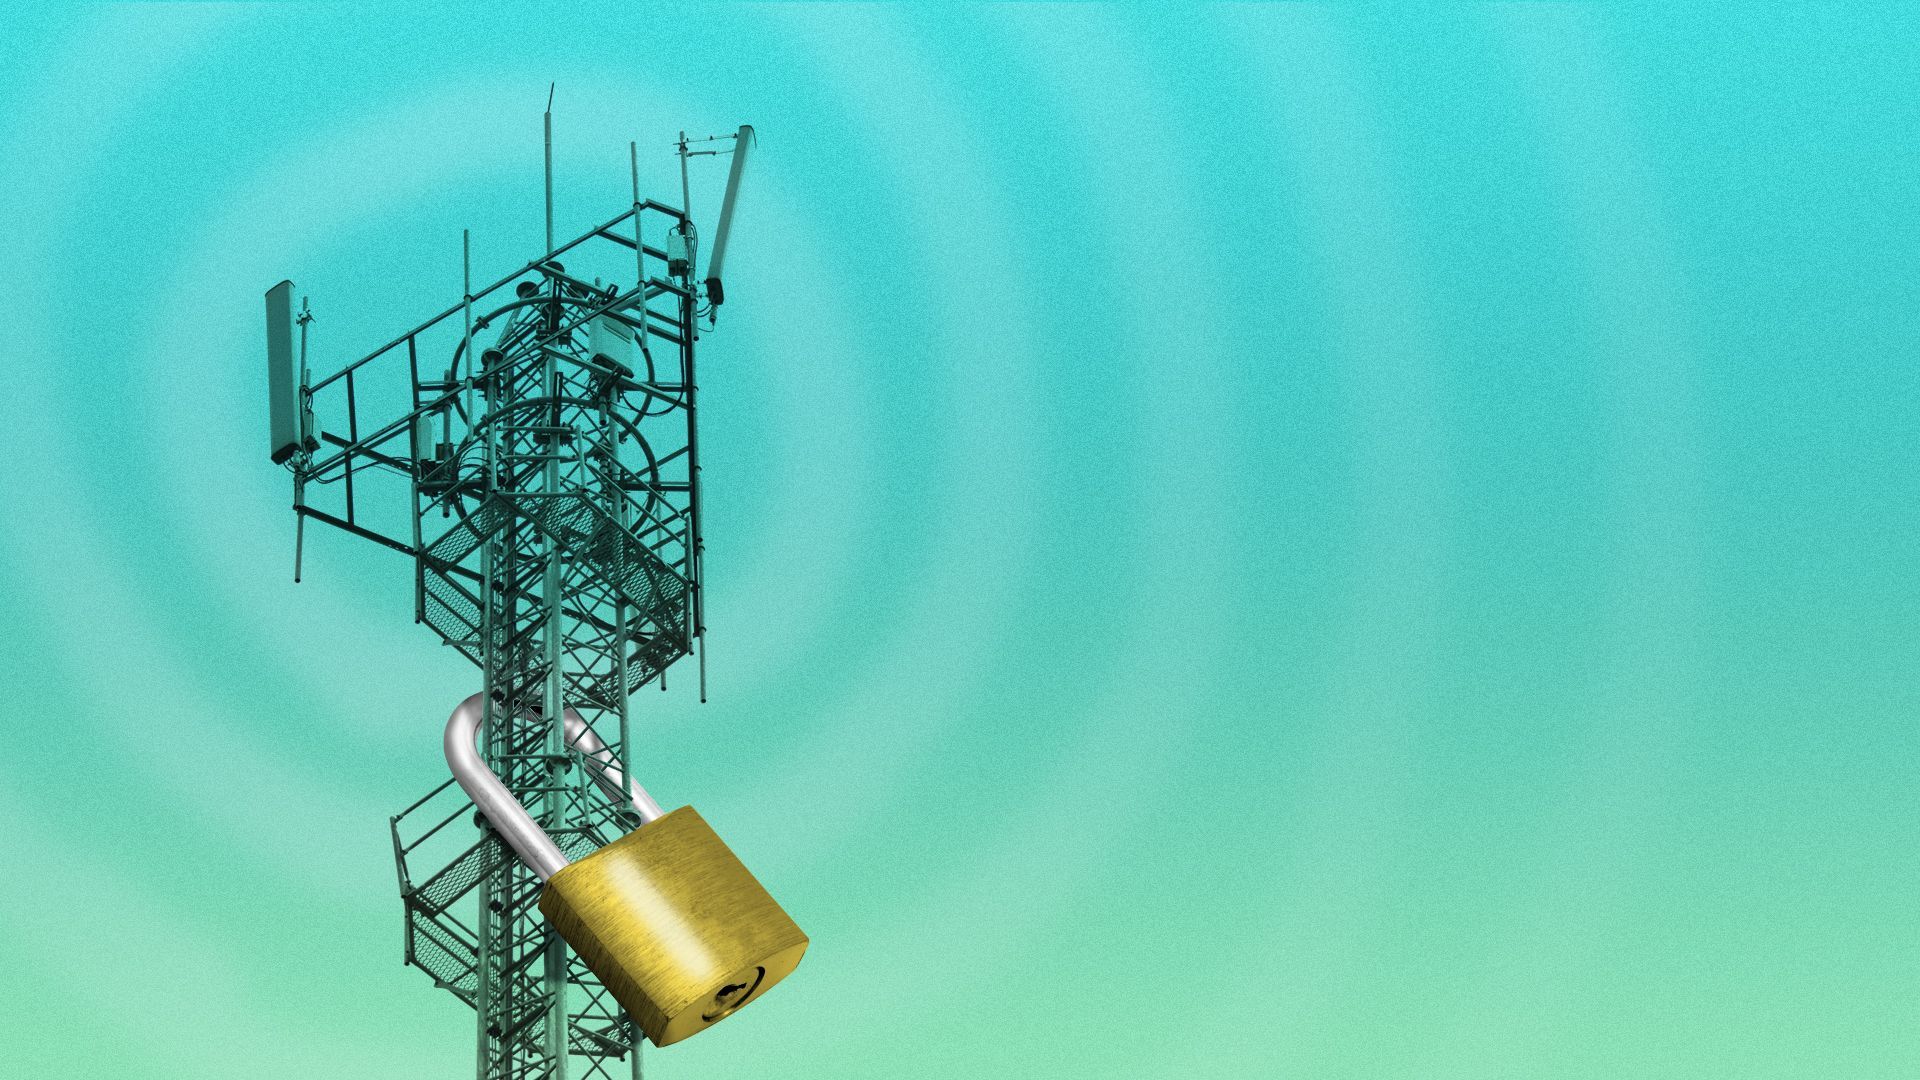 Illustration of a cell phone tower with a lock on it